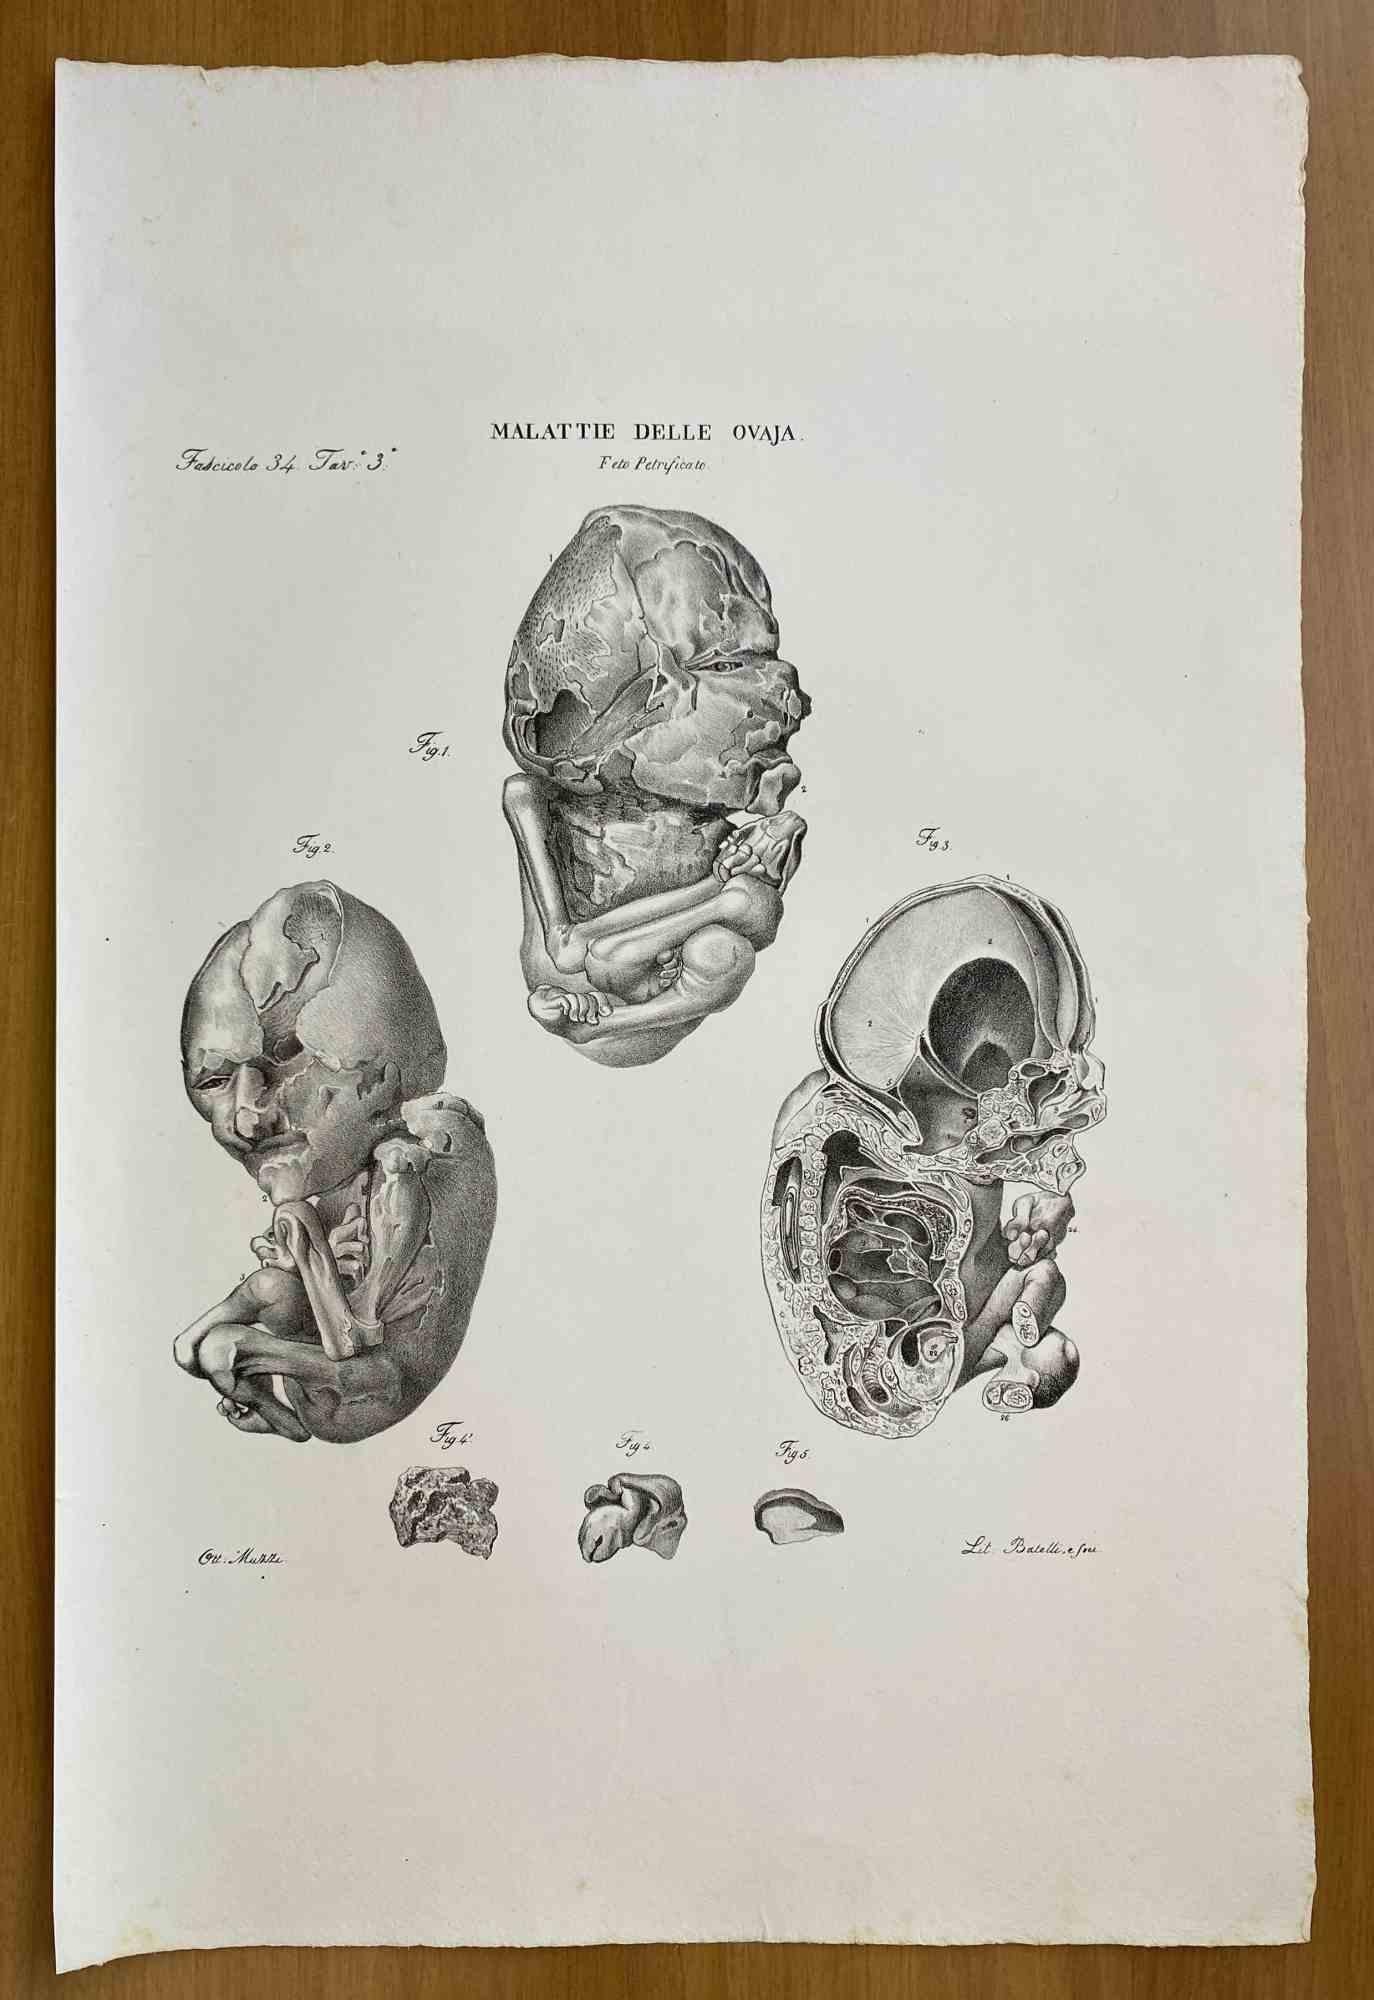 Diseases of the Ovary is a lithograph hand colored by Ottavio Muzzi for the edition of Antoine Chazal, Human Anatomy, Printers Batelli and Ridolfi, 1843.

The work belongs to the Atlante generale della anatomia patologica del corpo umano by Jean